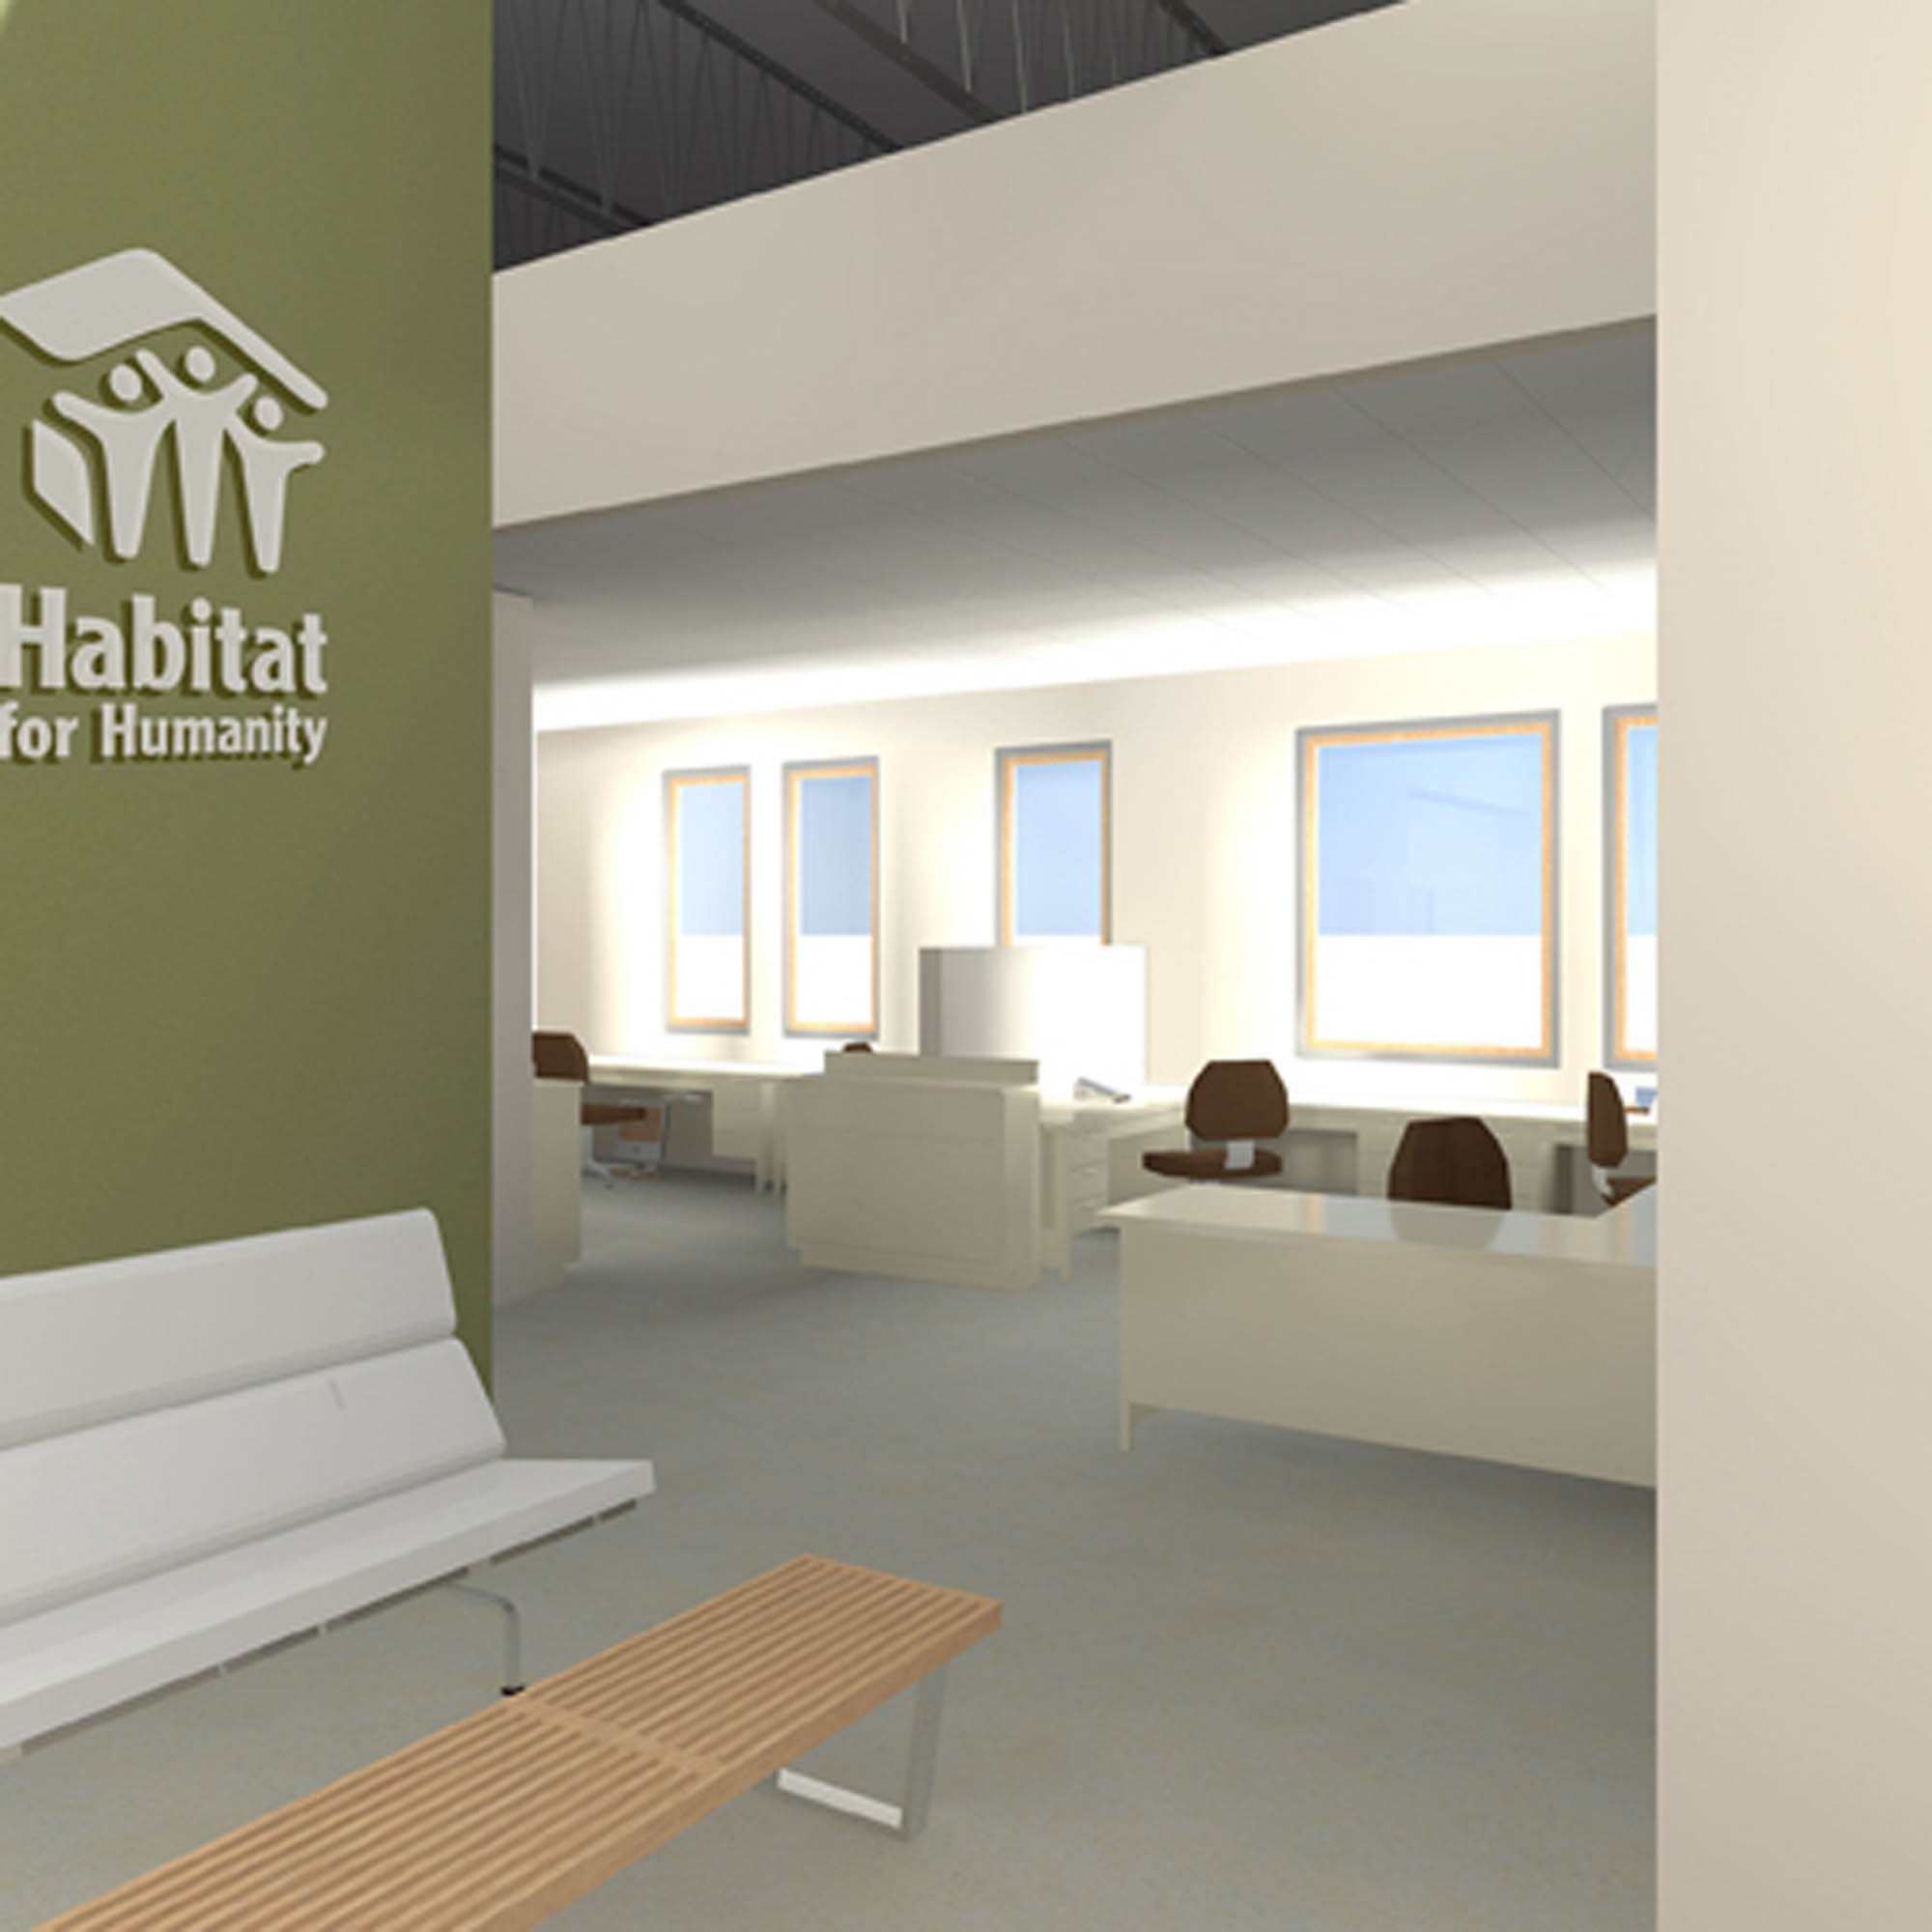 Office interior designed for the Habitat For Humanity